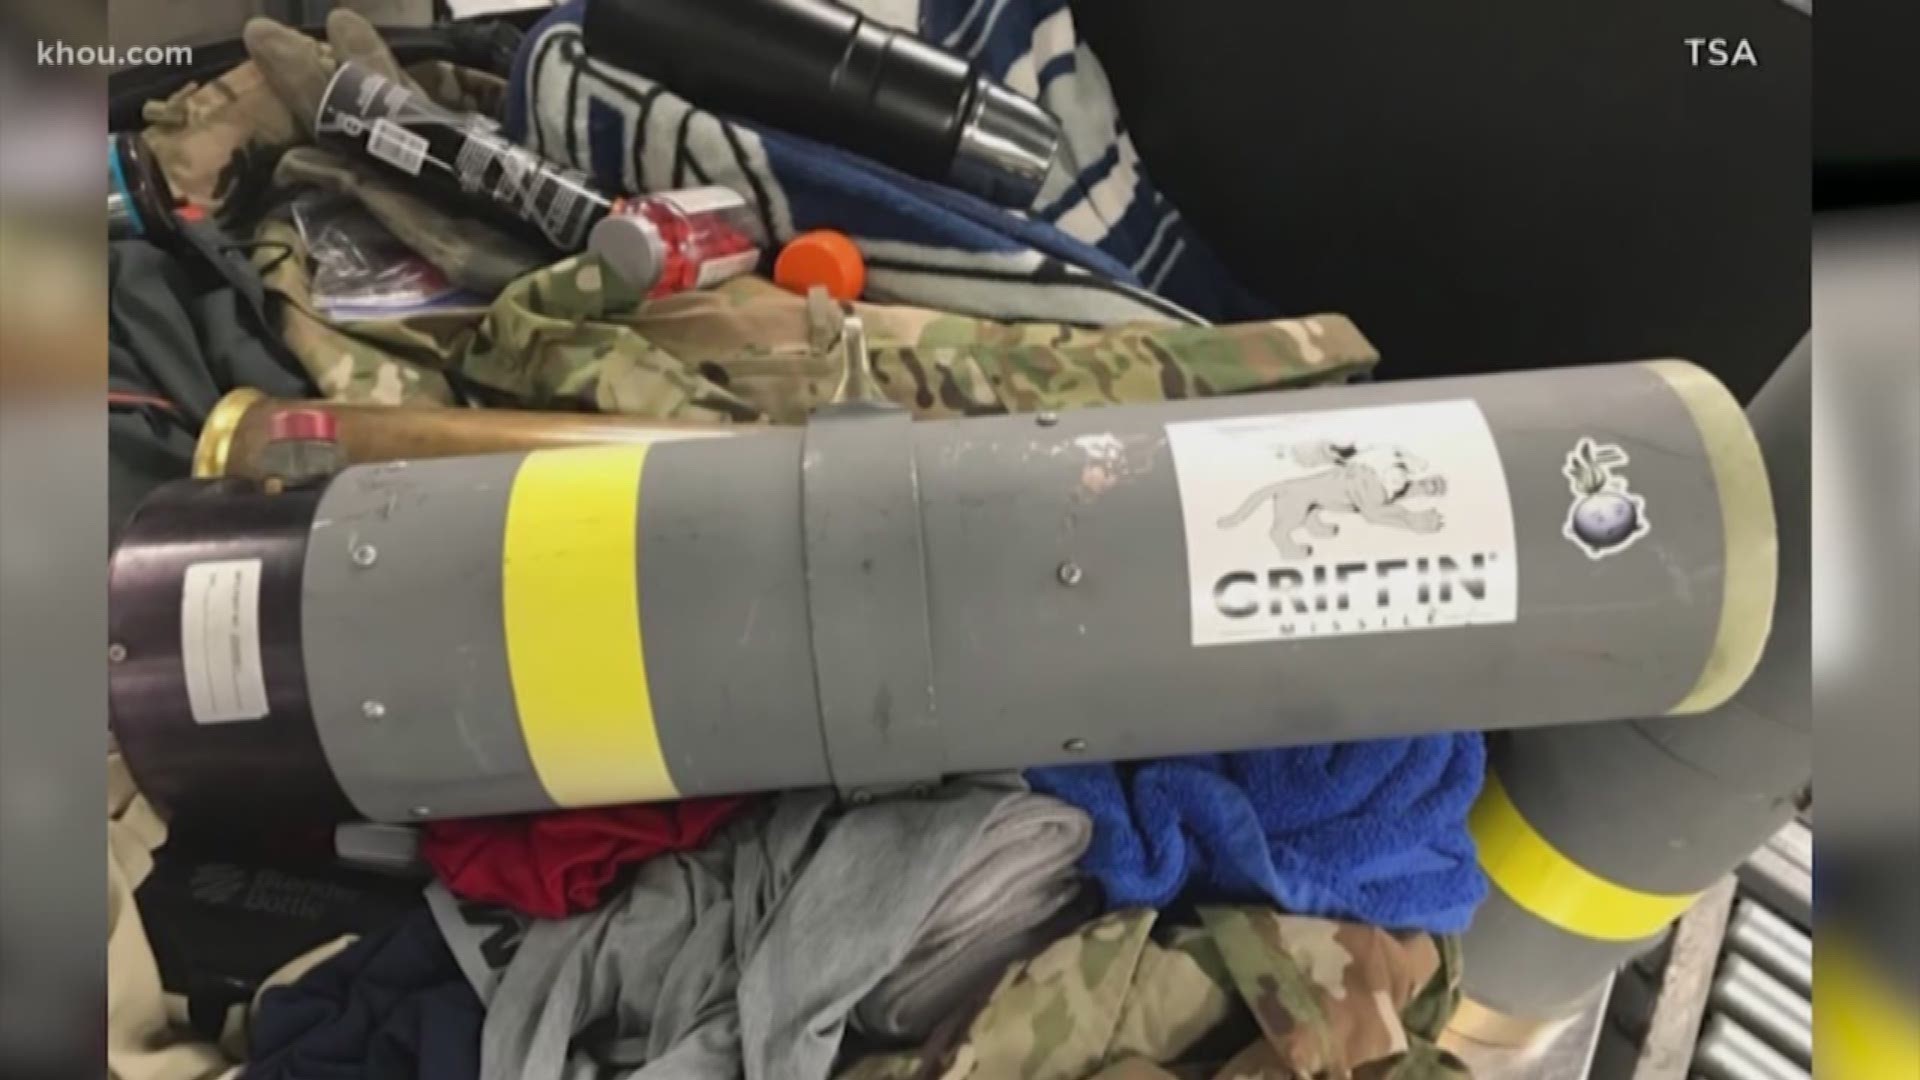 Transportation Security Administration officers discovered a missile launcher in a passenger's checked luggage Monday morning at Baltimore/Washington International Thurgood Marshall Airport.